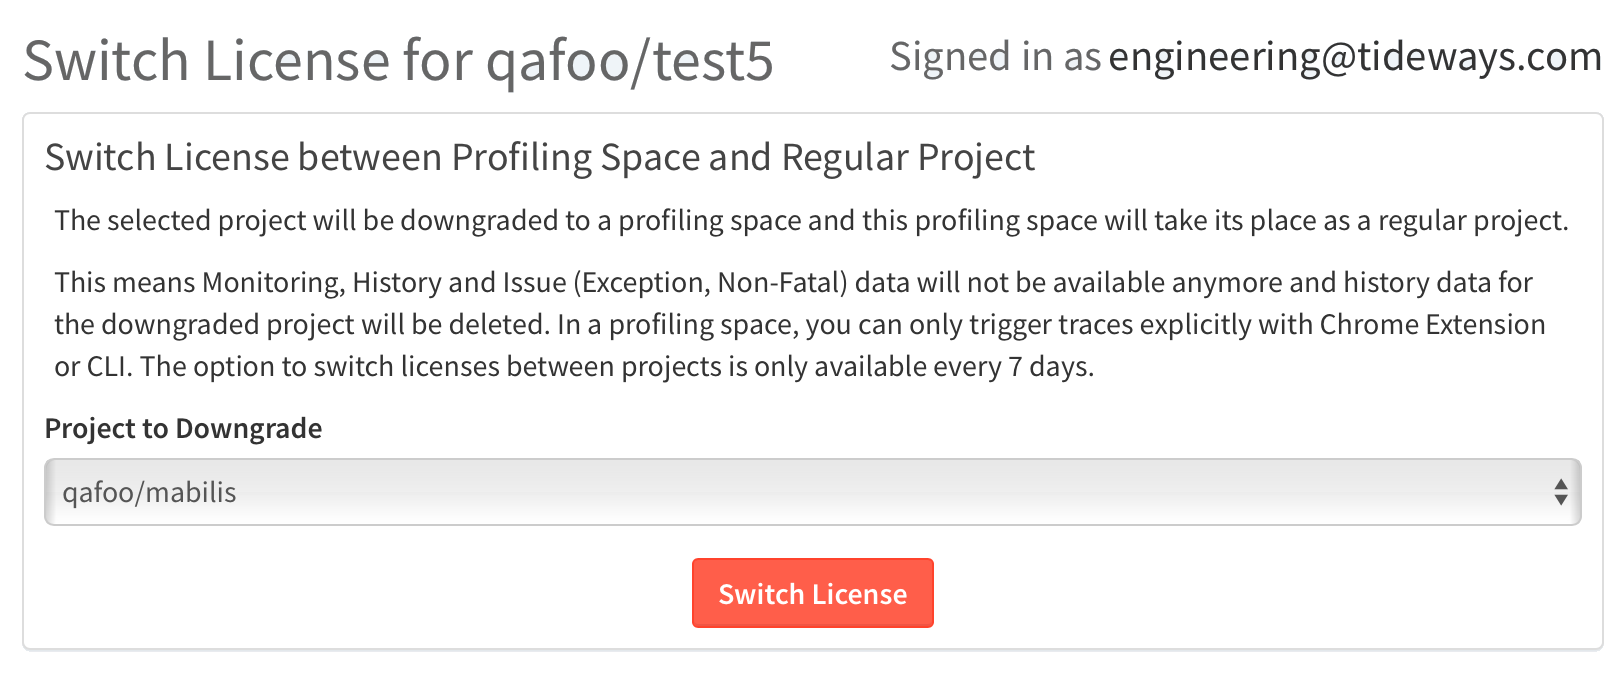 Confirmation screen to switch the license between a profiling space and a regular project.